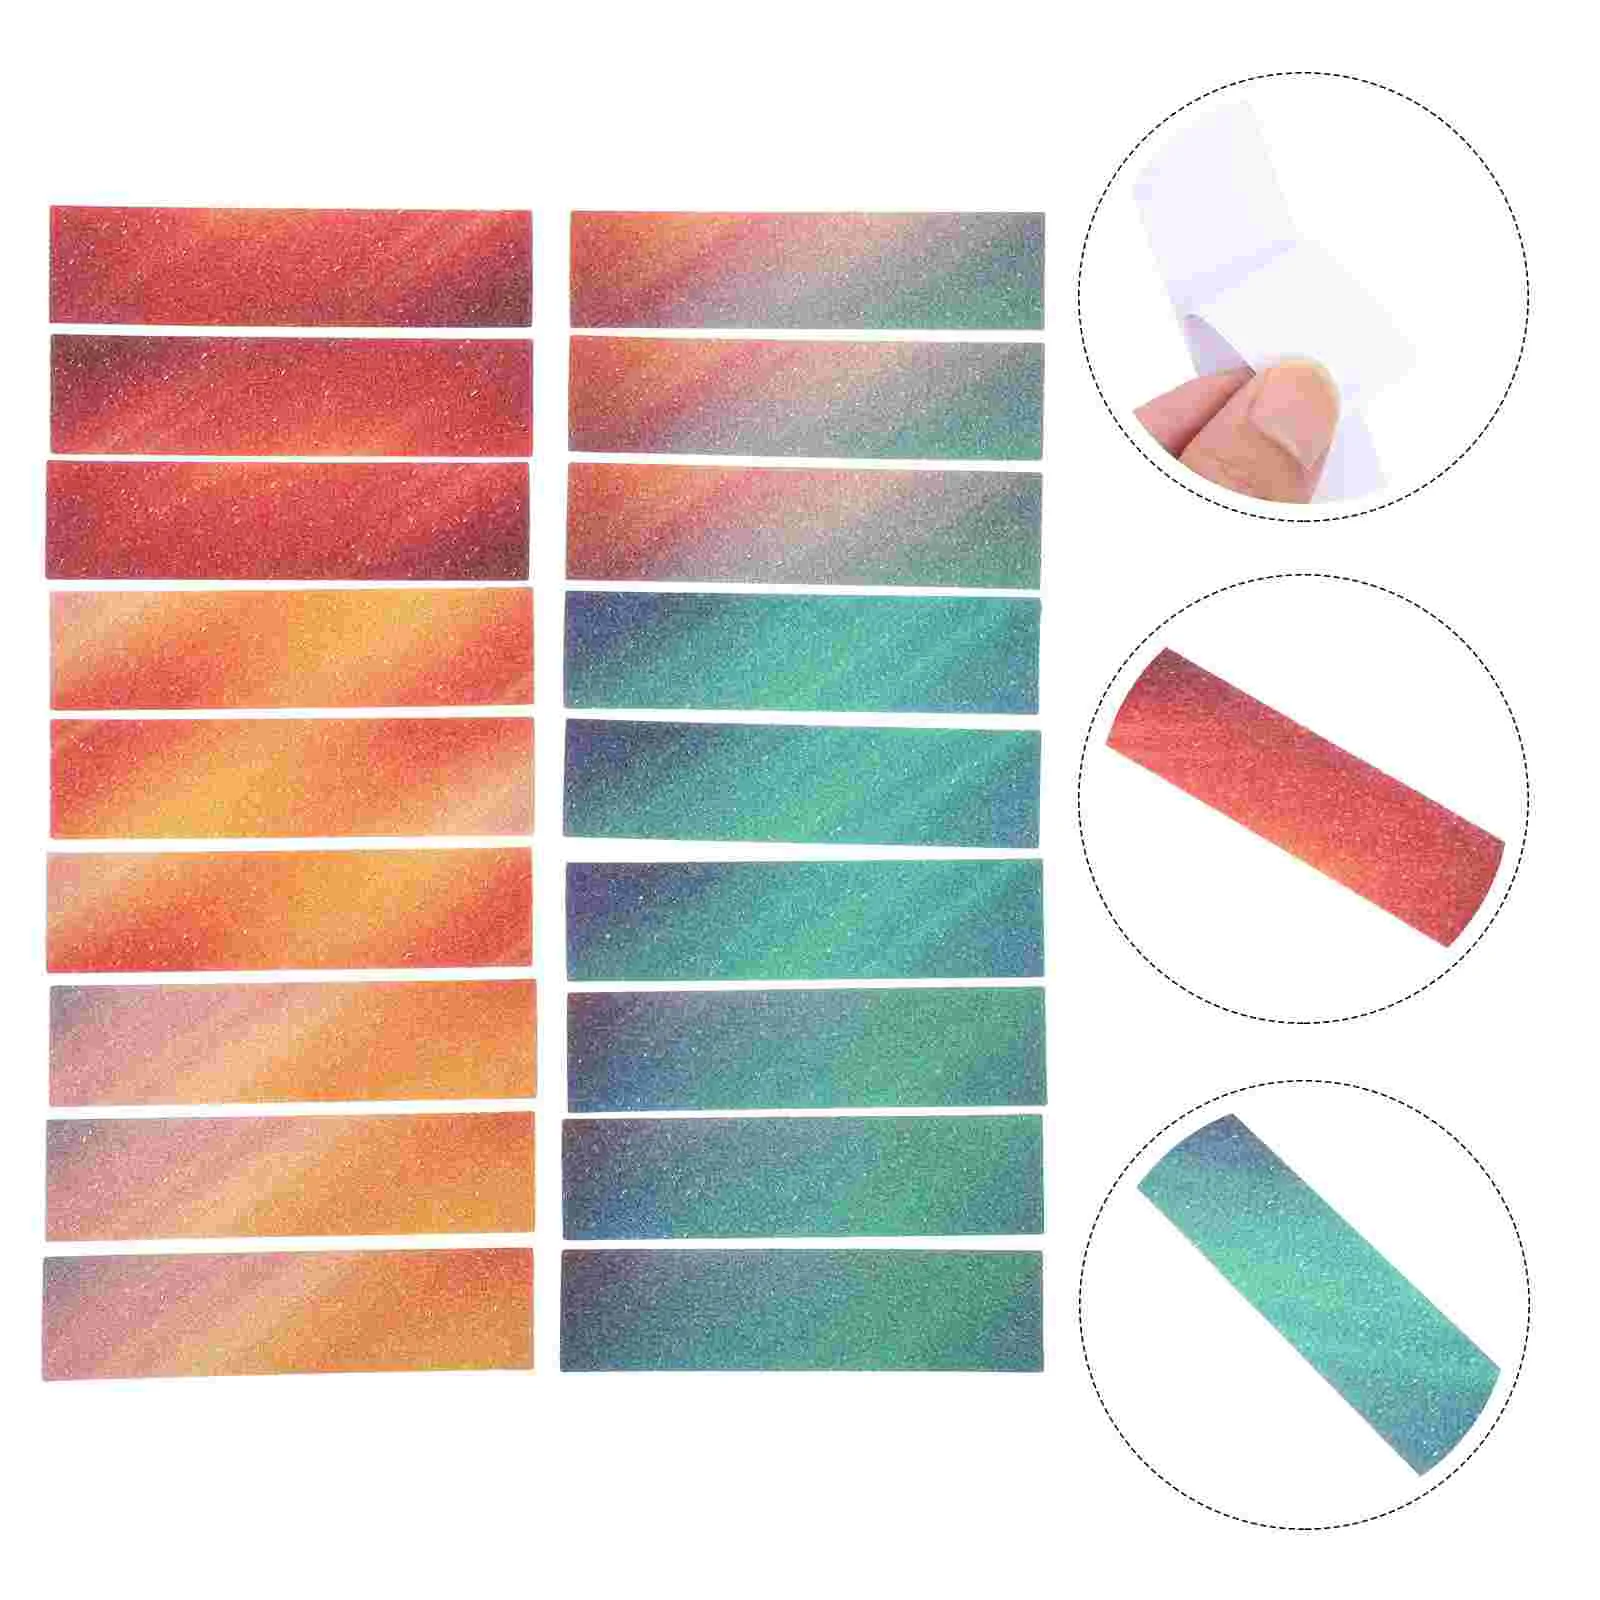 

18 Pcs Car Supplies Decompression Strip Calming Strips Corner Anxiety Relief Decals Textured Sensory Stickers